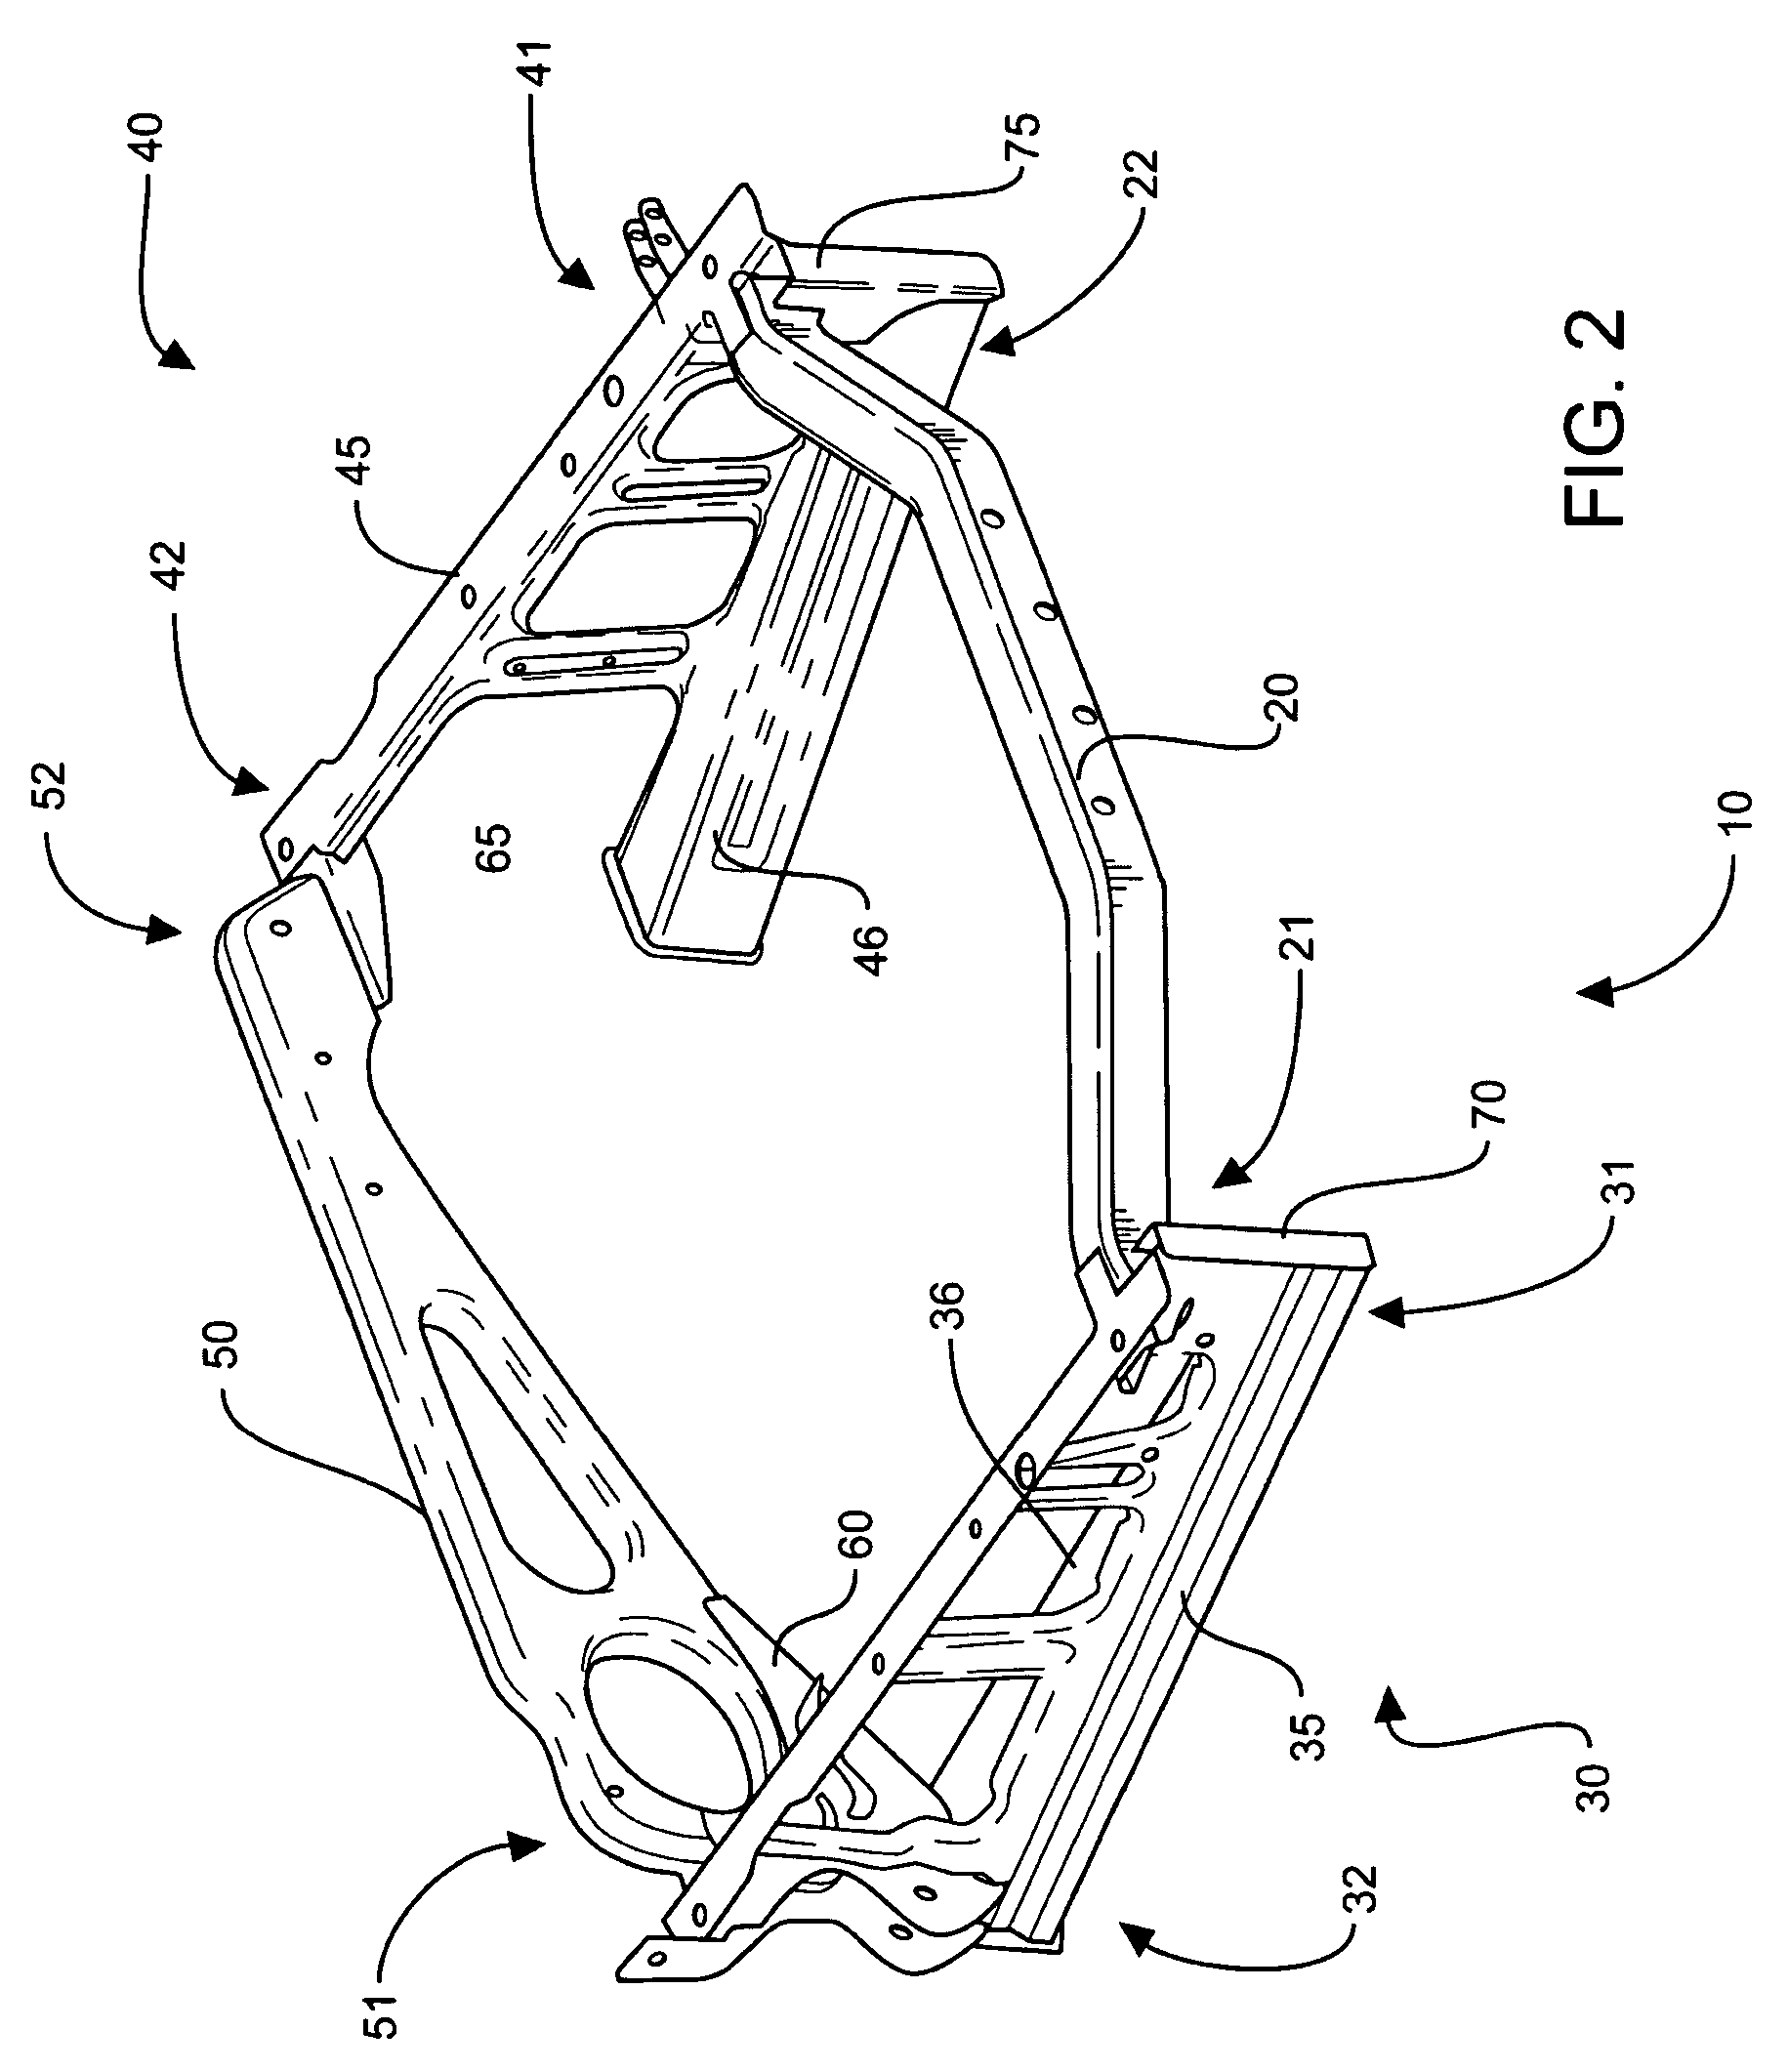 Force redistributing system for a vehicle in the event of a rear impact